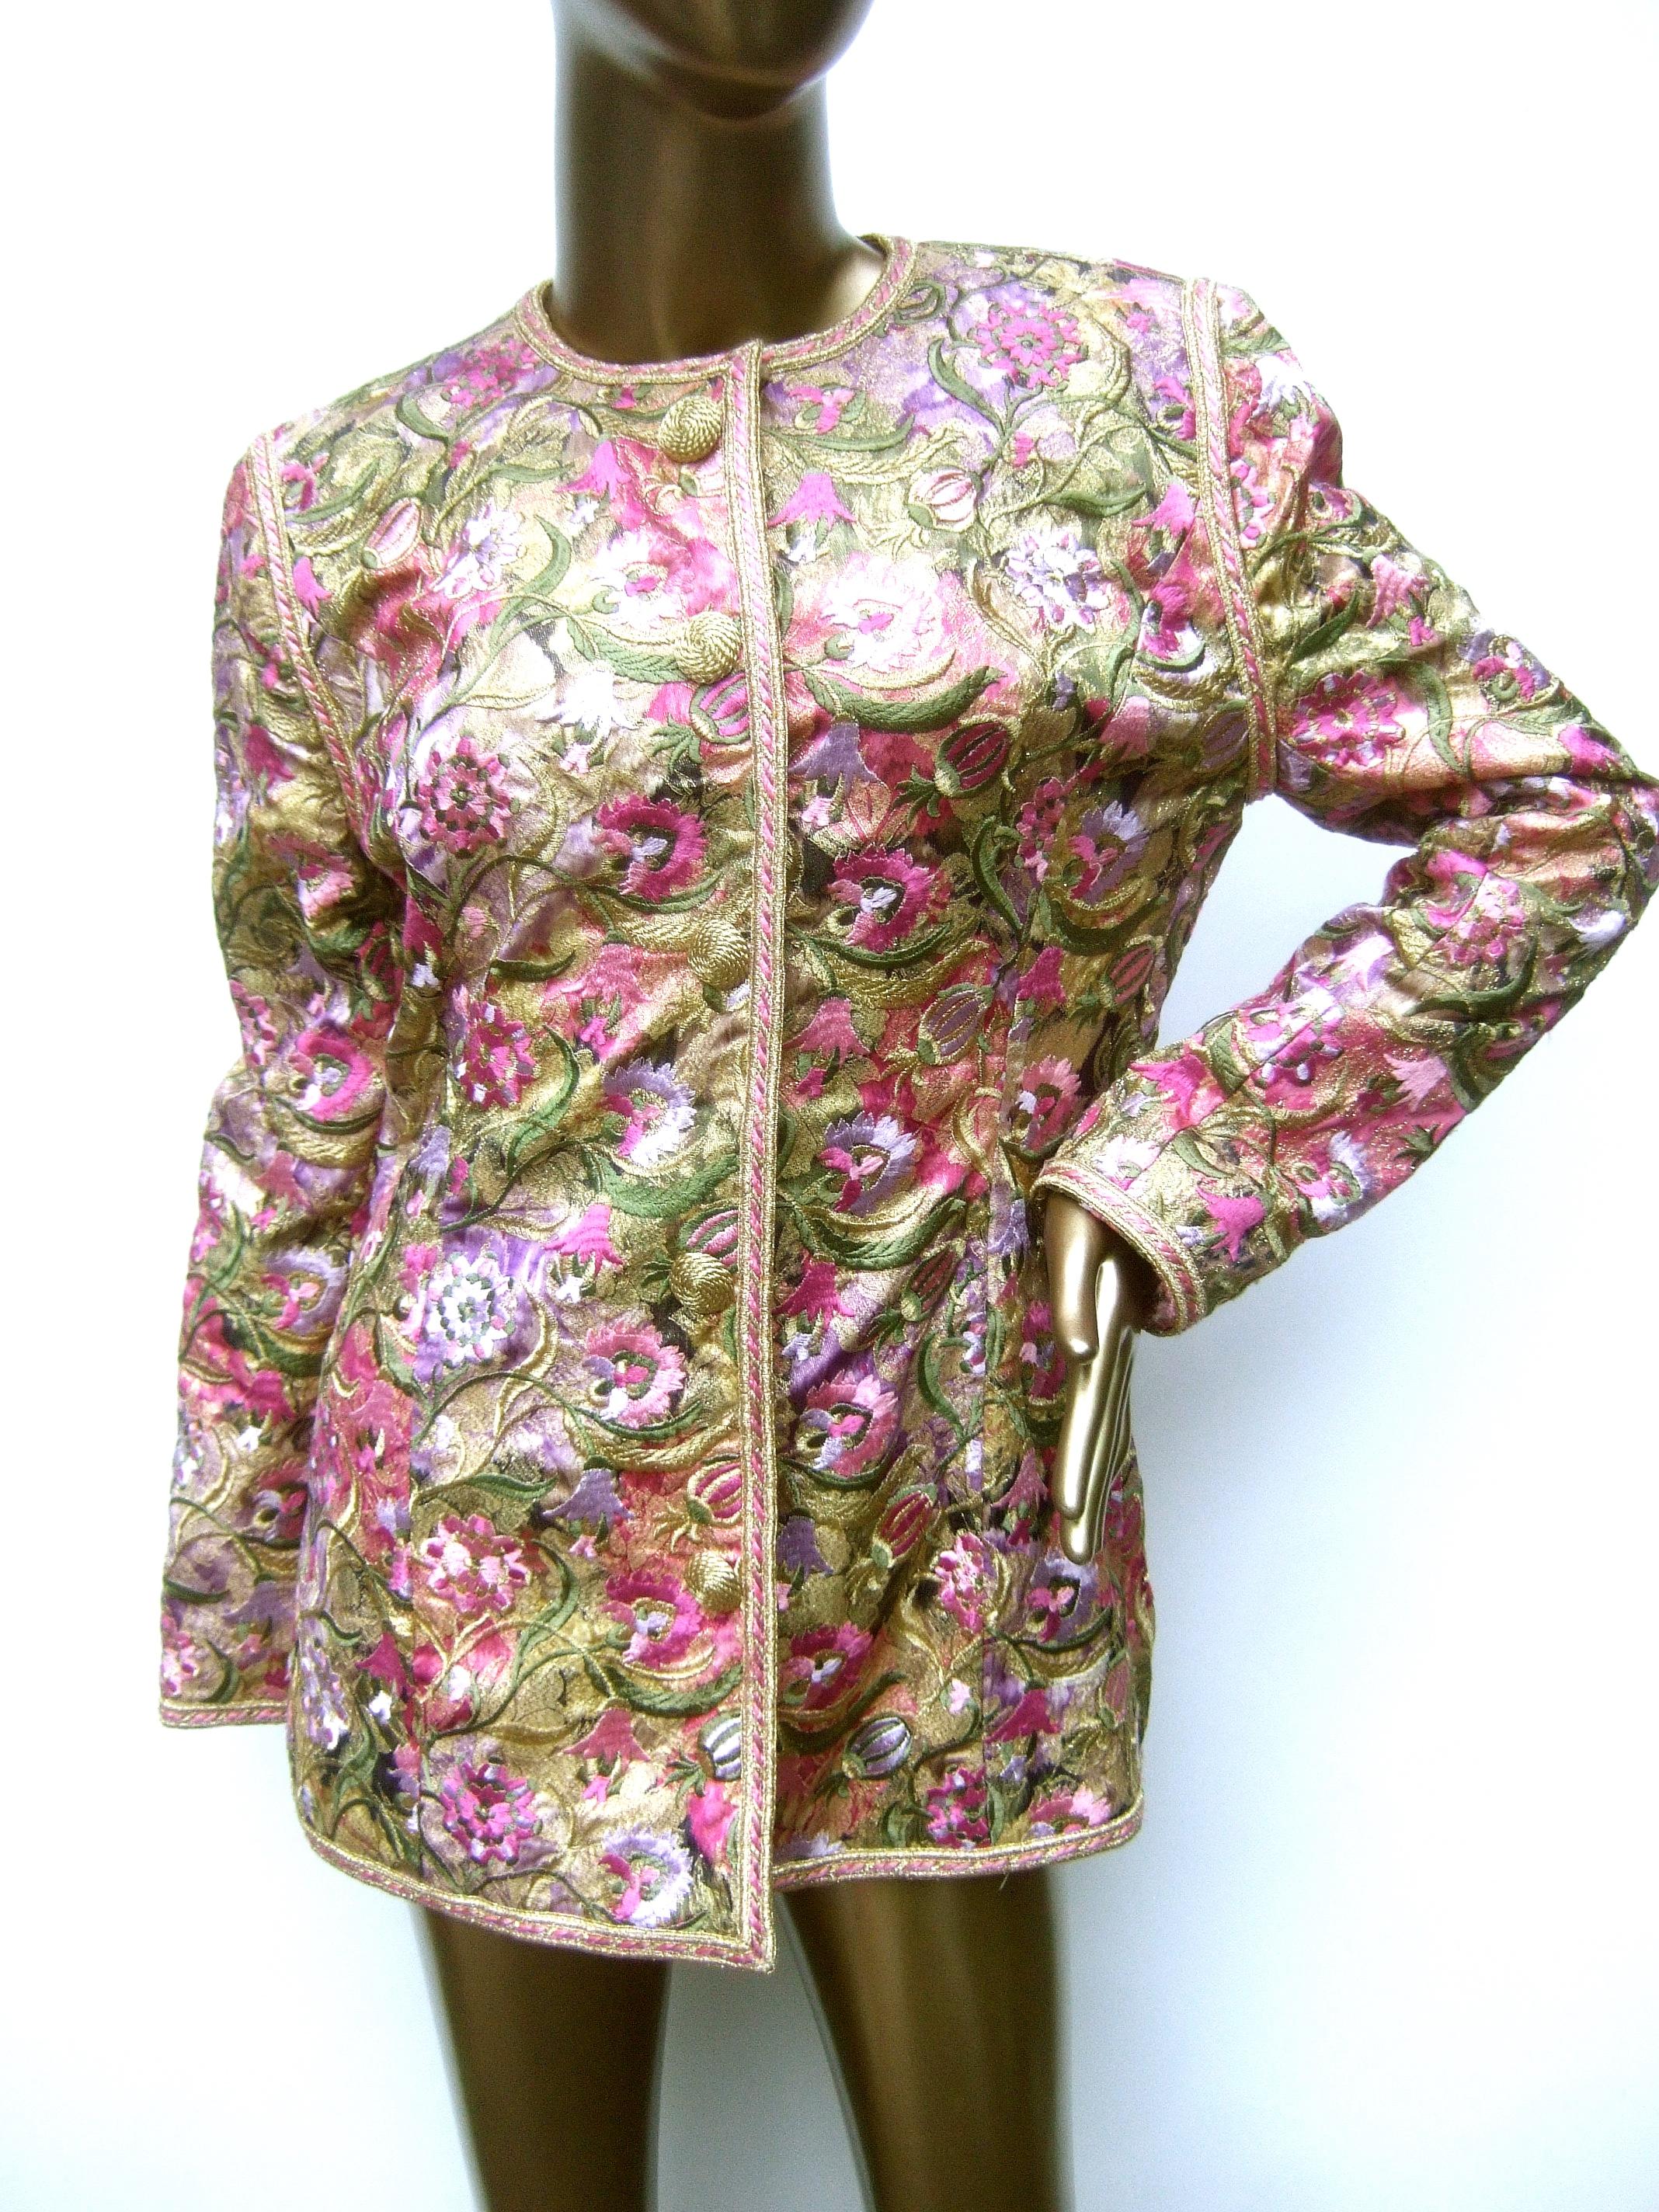 Saks Fifth Avenue Pastel Floral Embroidered Jacket by Victor Costa c 1980s 3